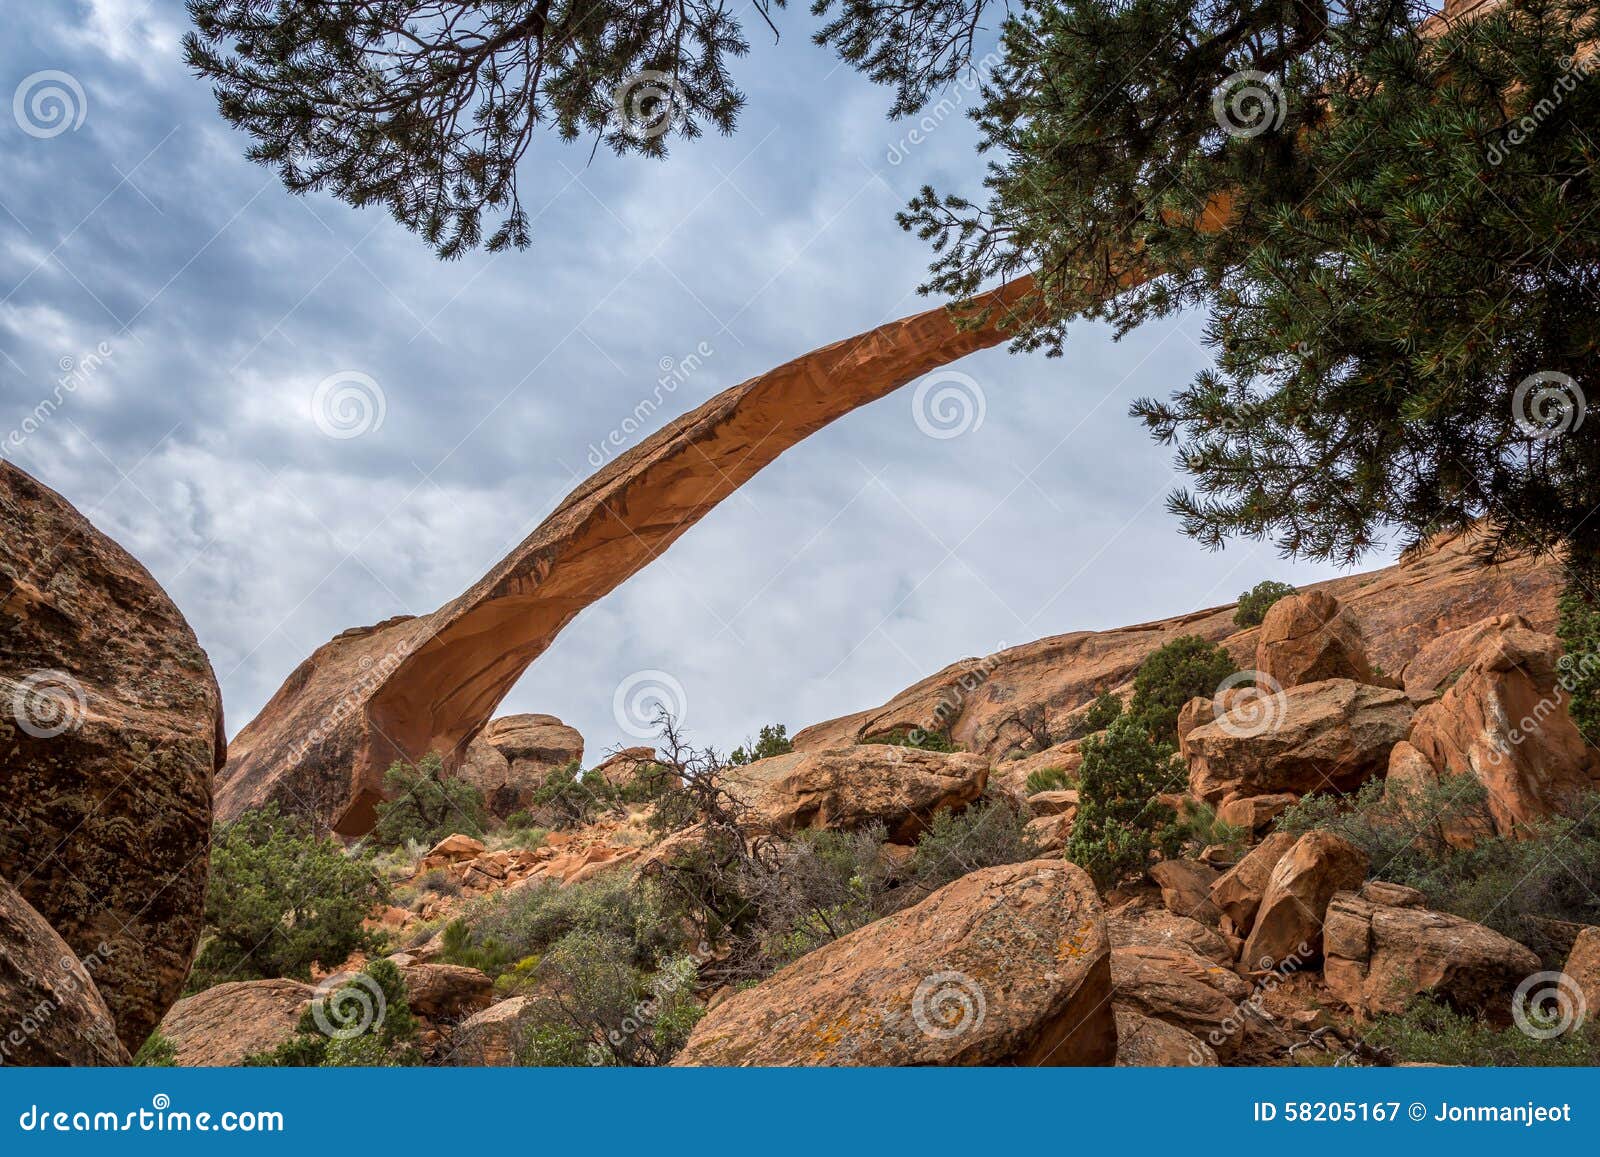 Sandstone Arches And Natural Structures Stock Image Image Of Getaway